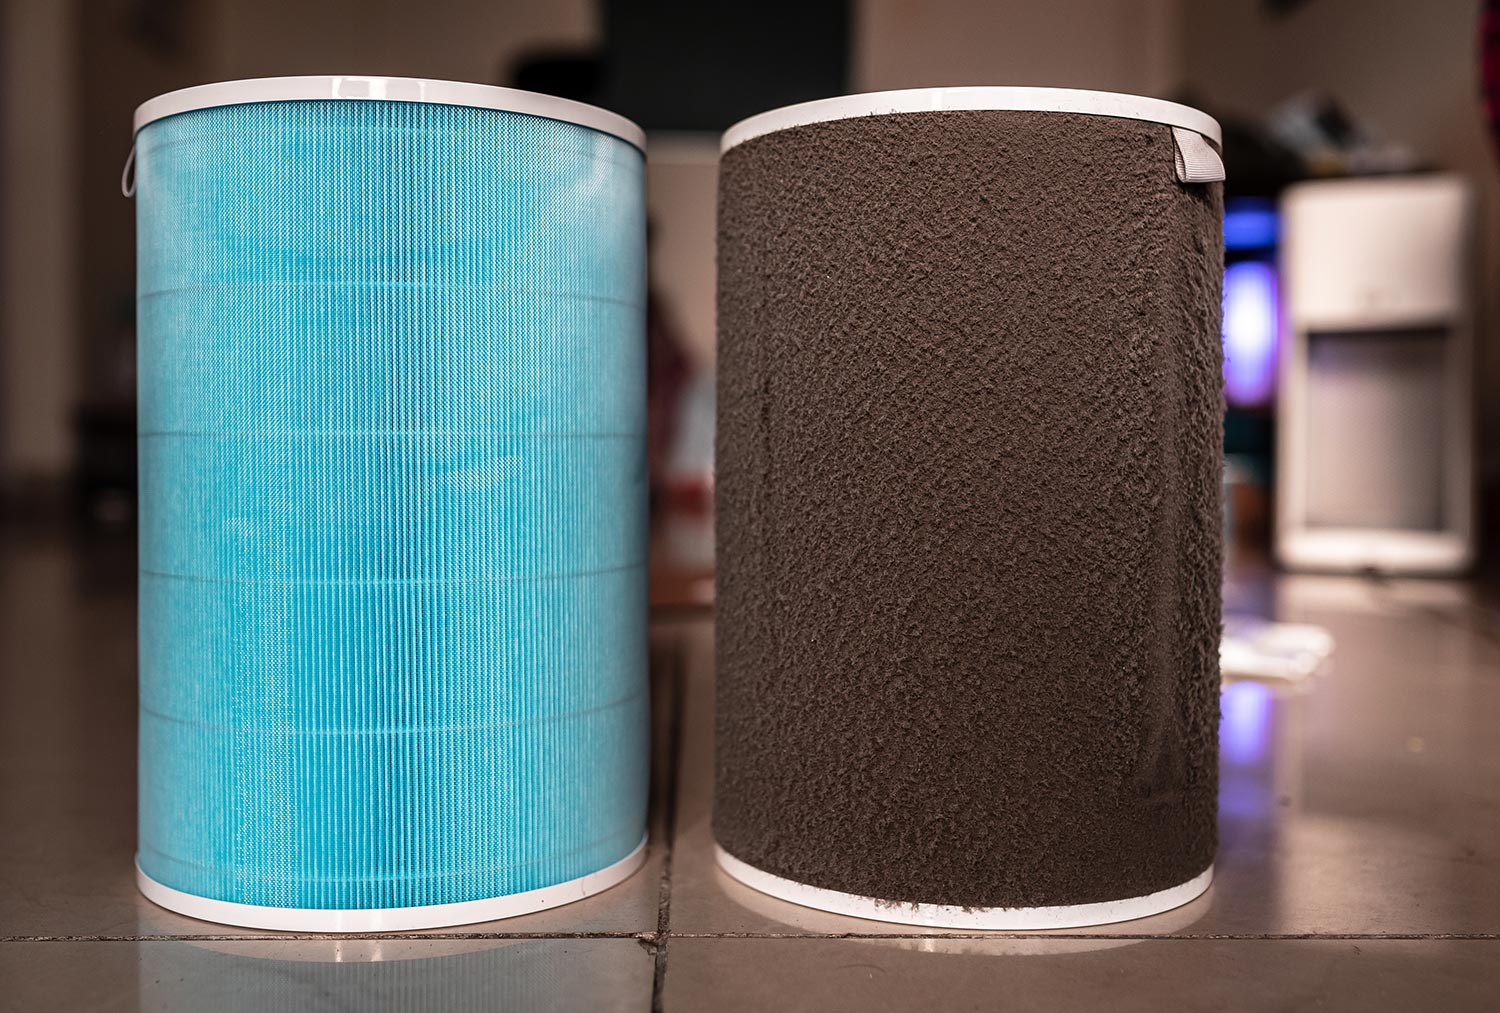 Air purifier filter for pollutants and micro organisms before and after use for a month